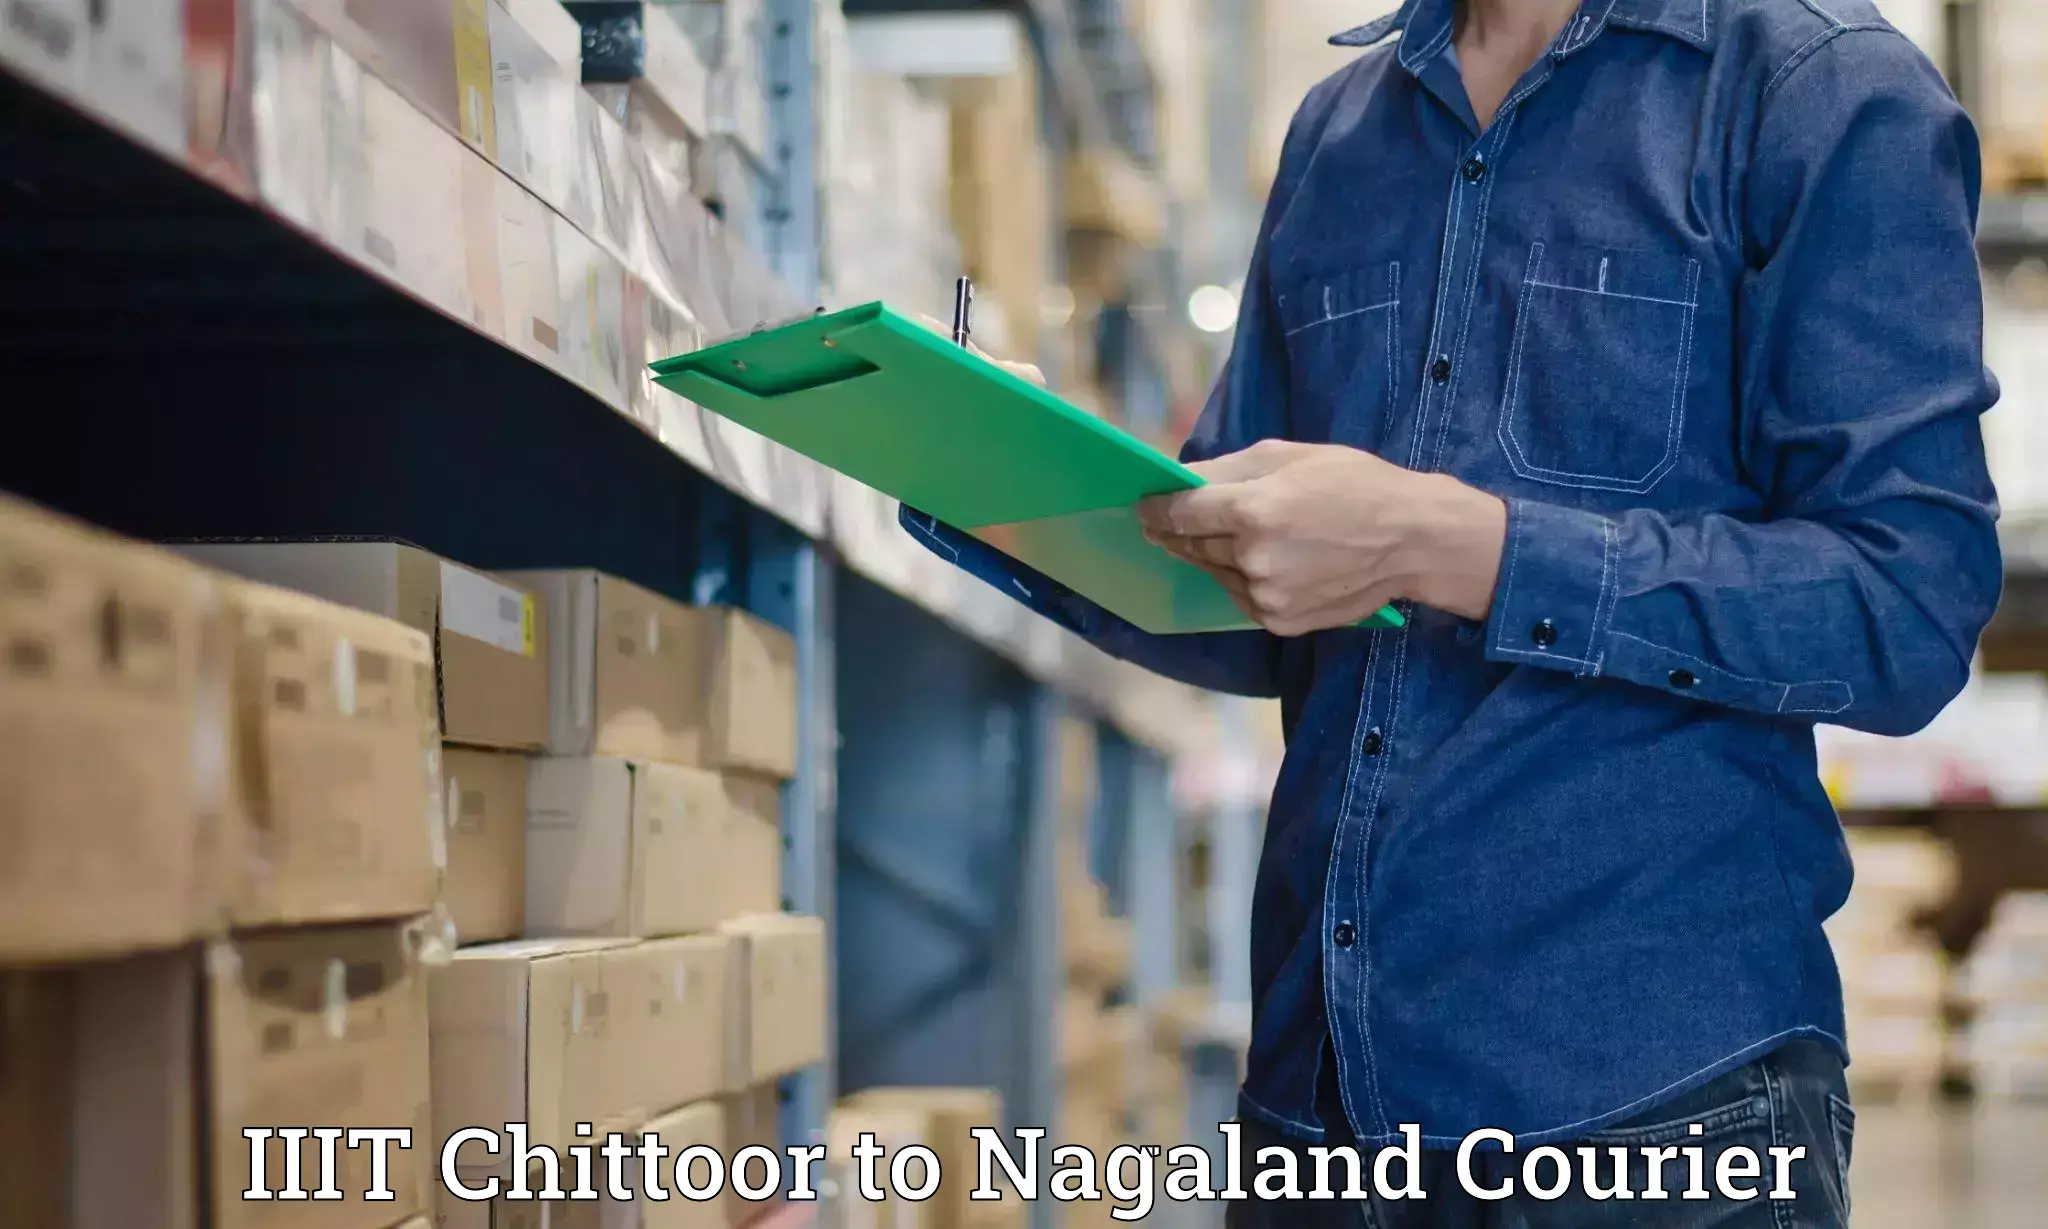 Subscription-based courier IIIT Chittoor to Mon